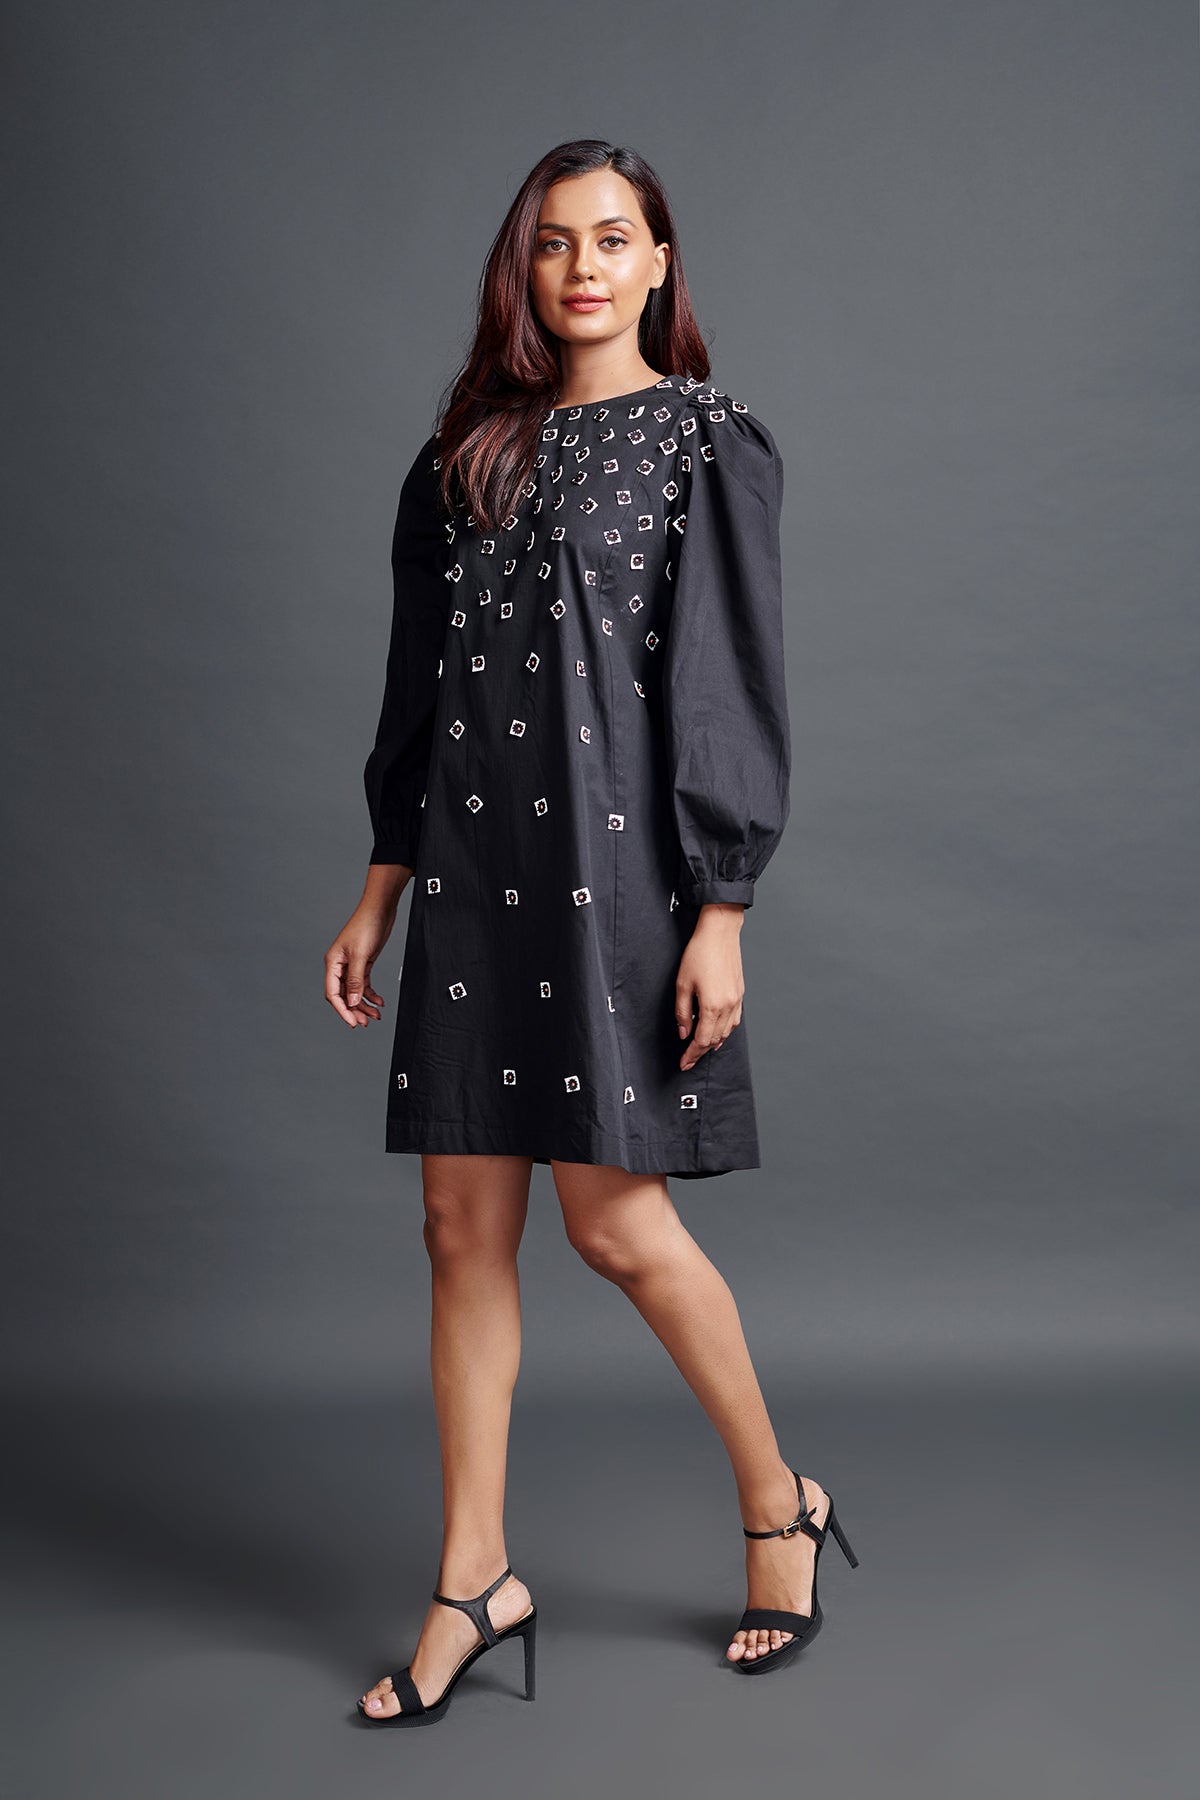 Image of BLACK GATHERED HEM DRESS IN COTTON BASE WITH CUTWORK EMBROIDERY. From savoirfashions.com